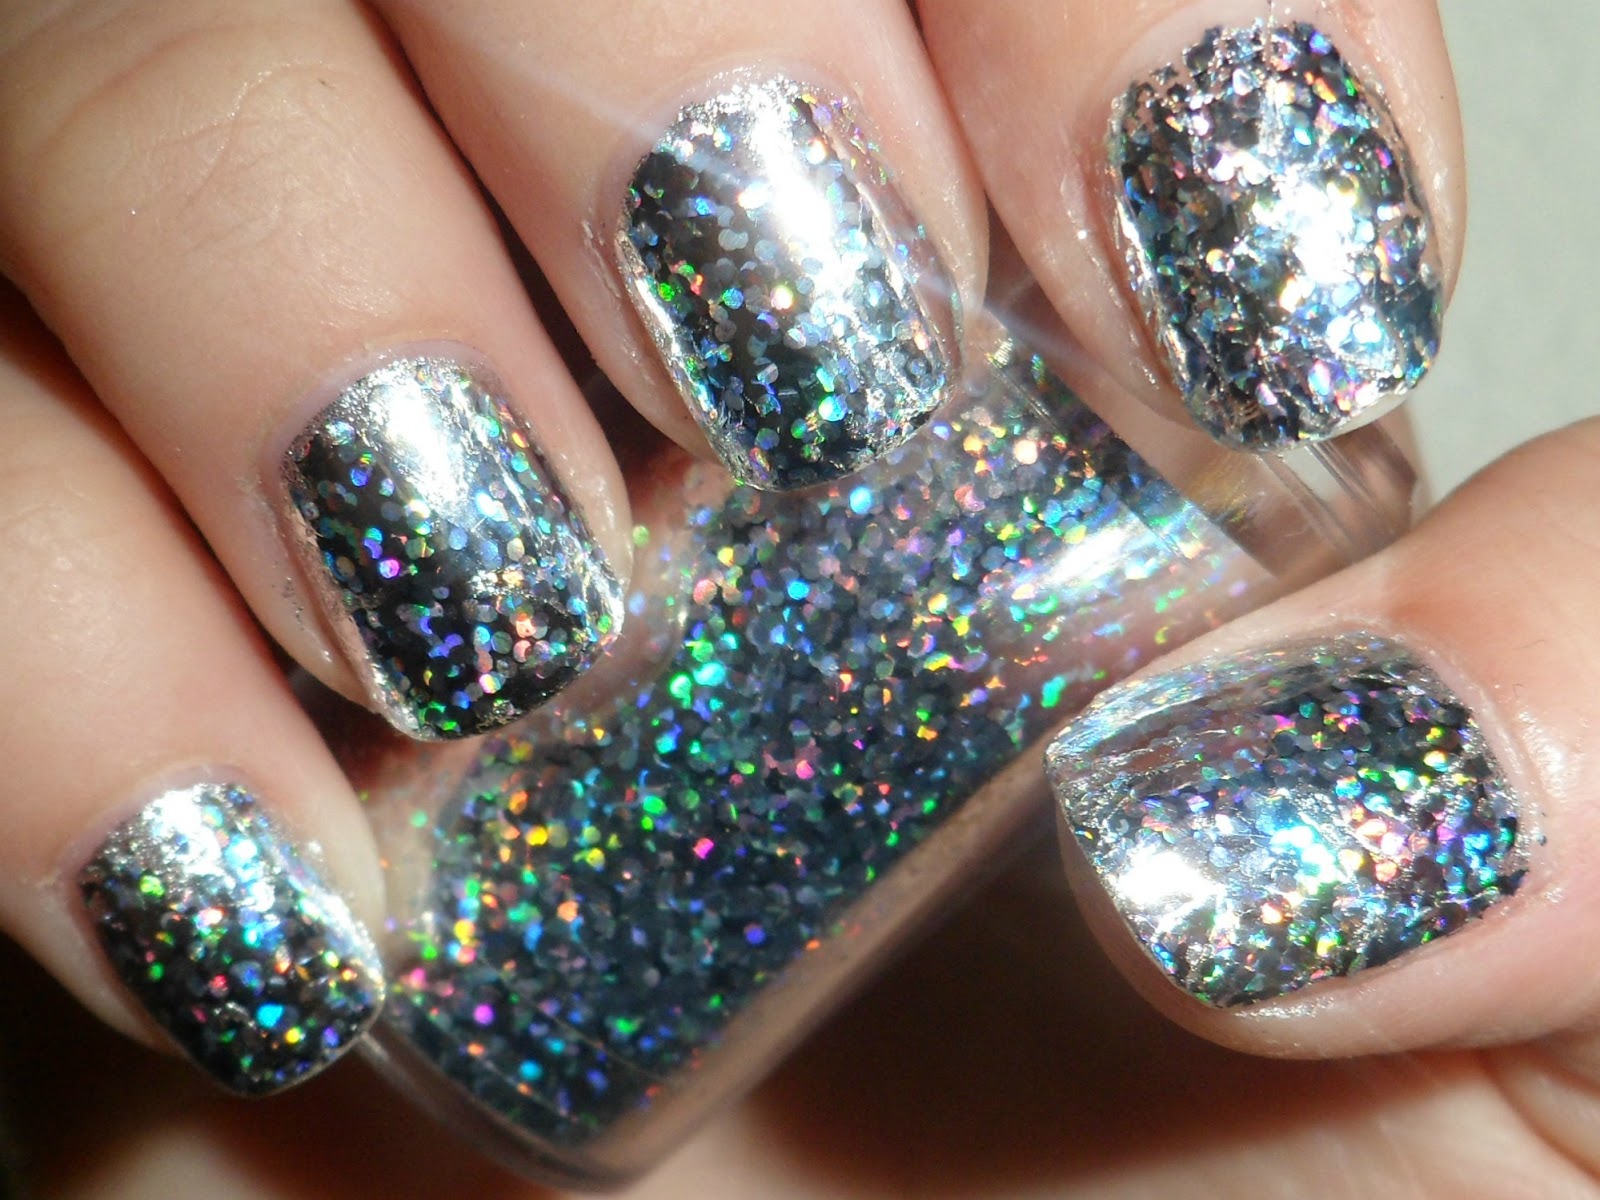 6. 10 Foil Nail Art Designs That Will Make Your Nails Shine - wide 7